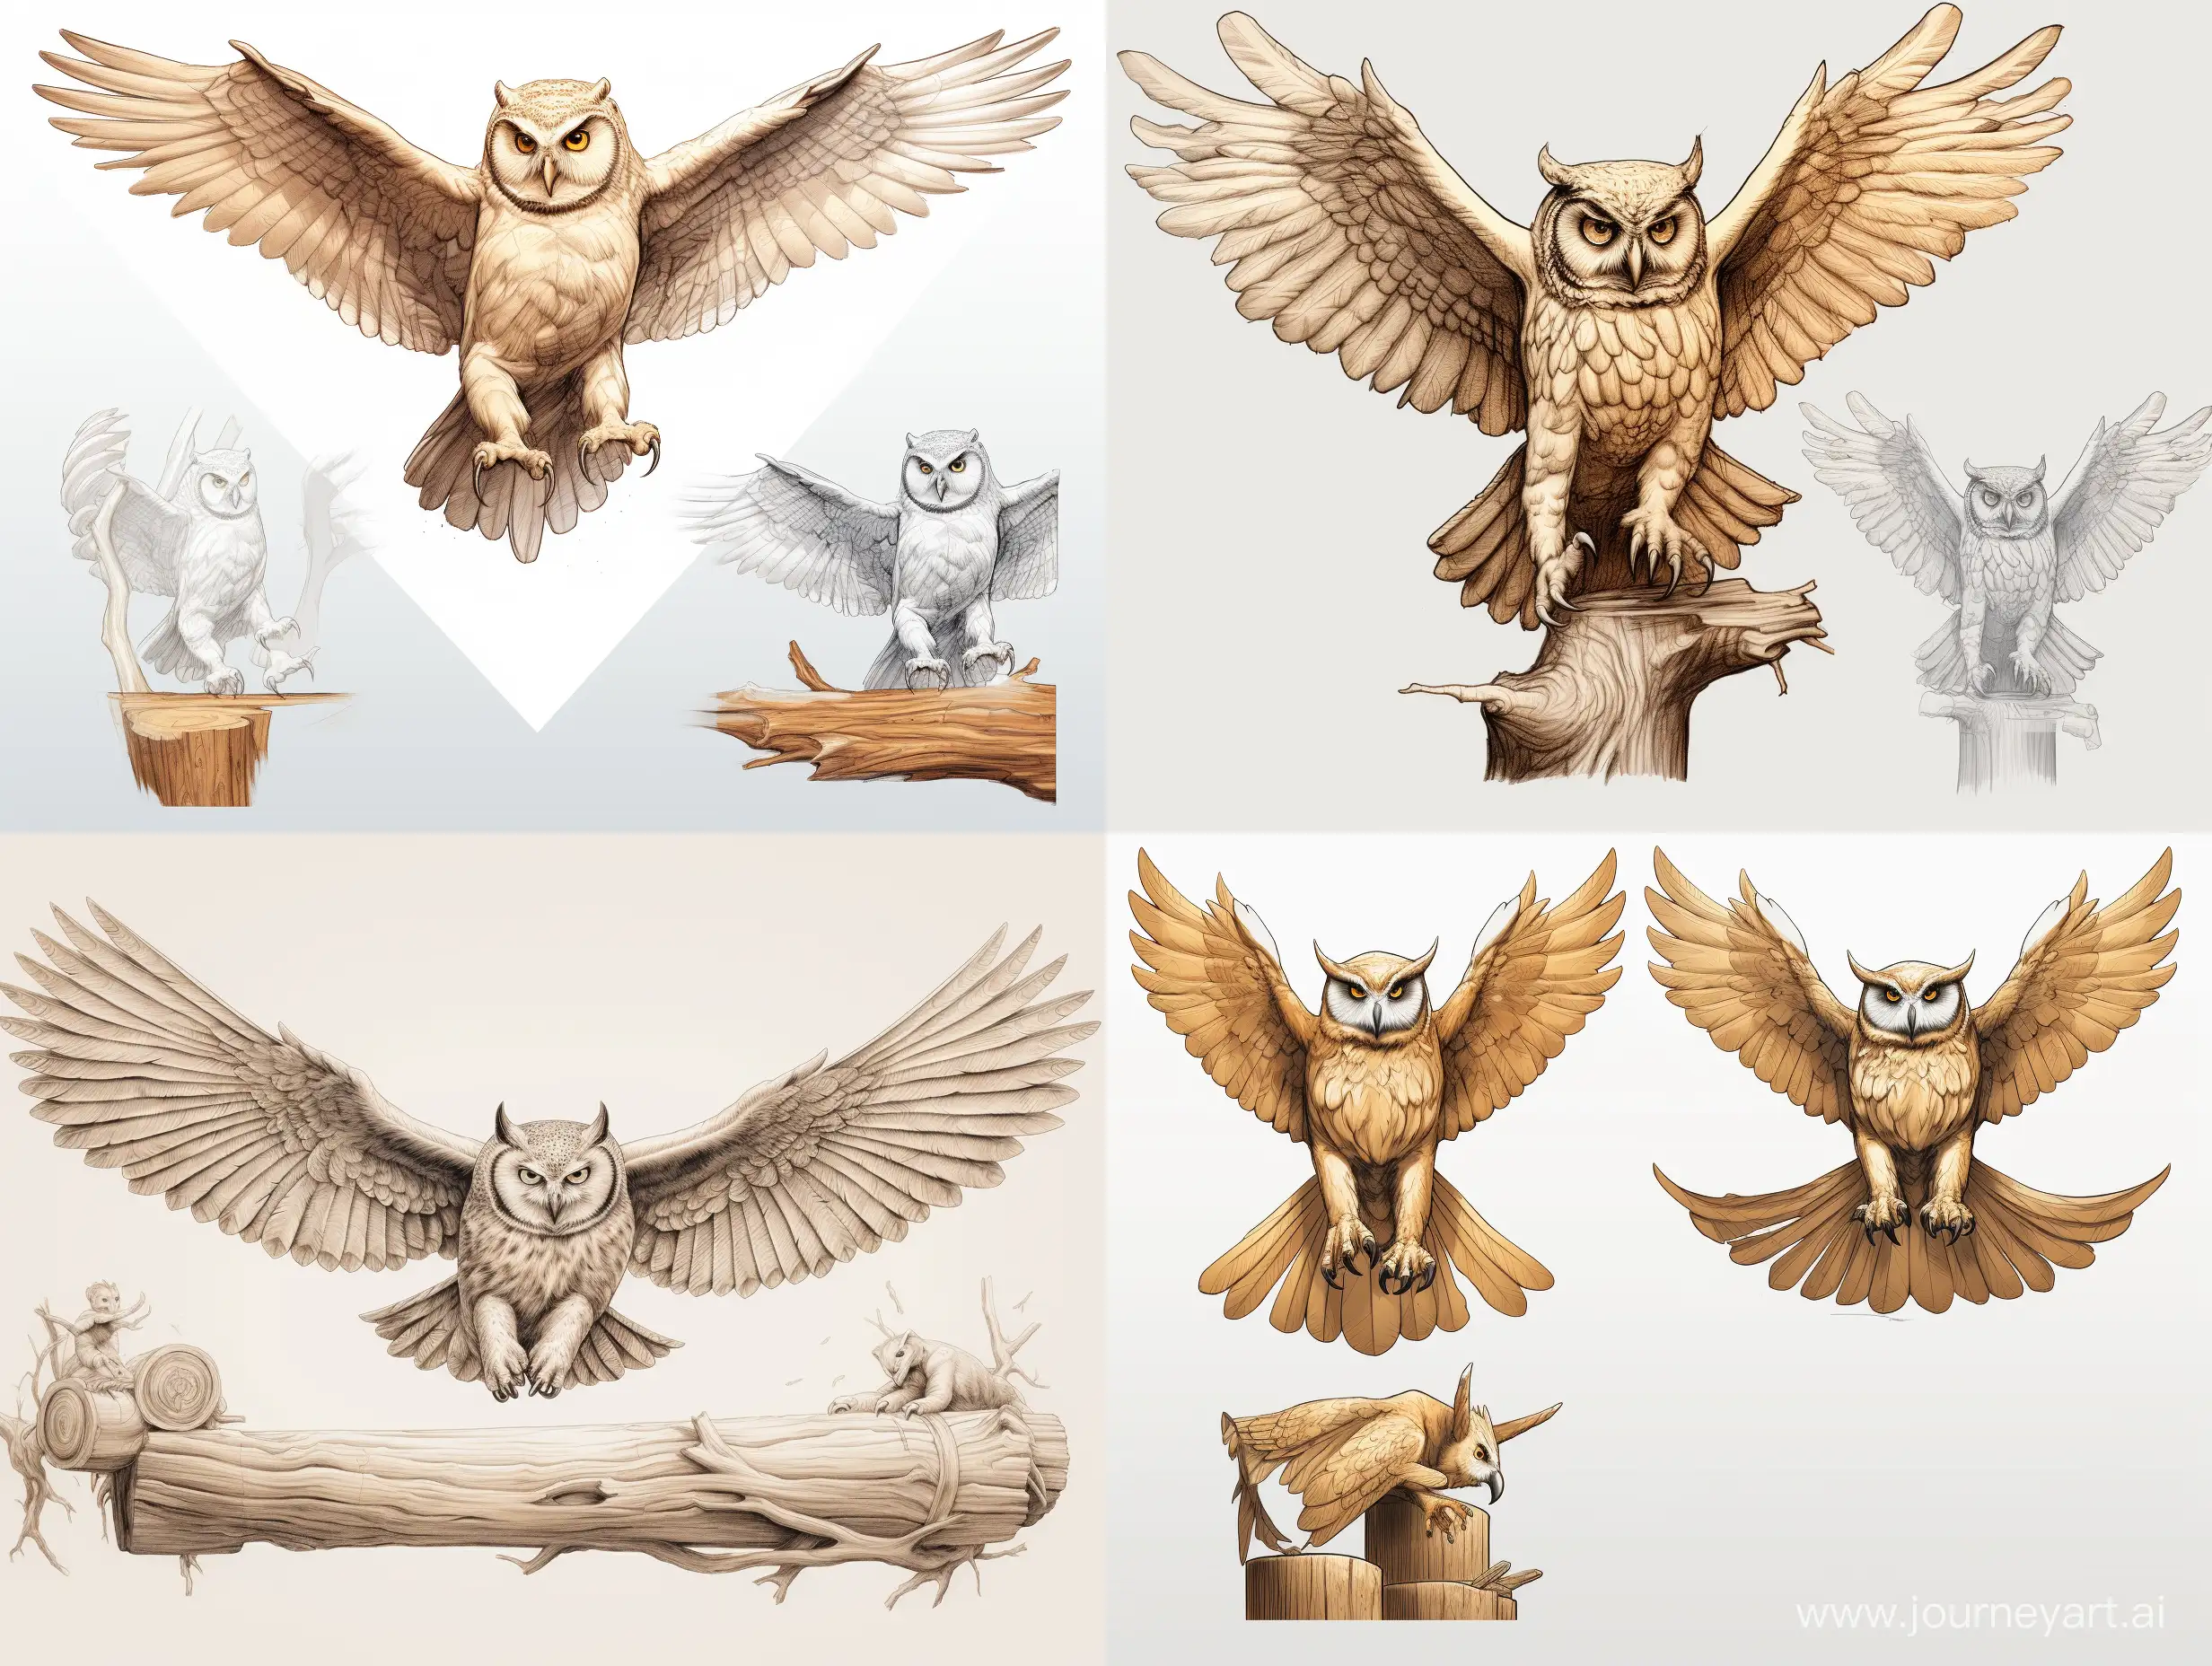 Realistic-LifeSize-Owl-Wood-Carving-in-Flight-on-Wooden-Cube